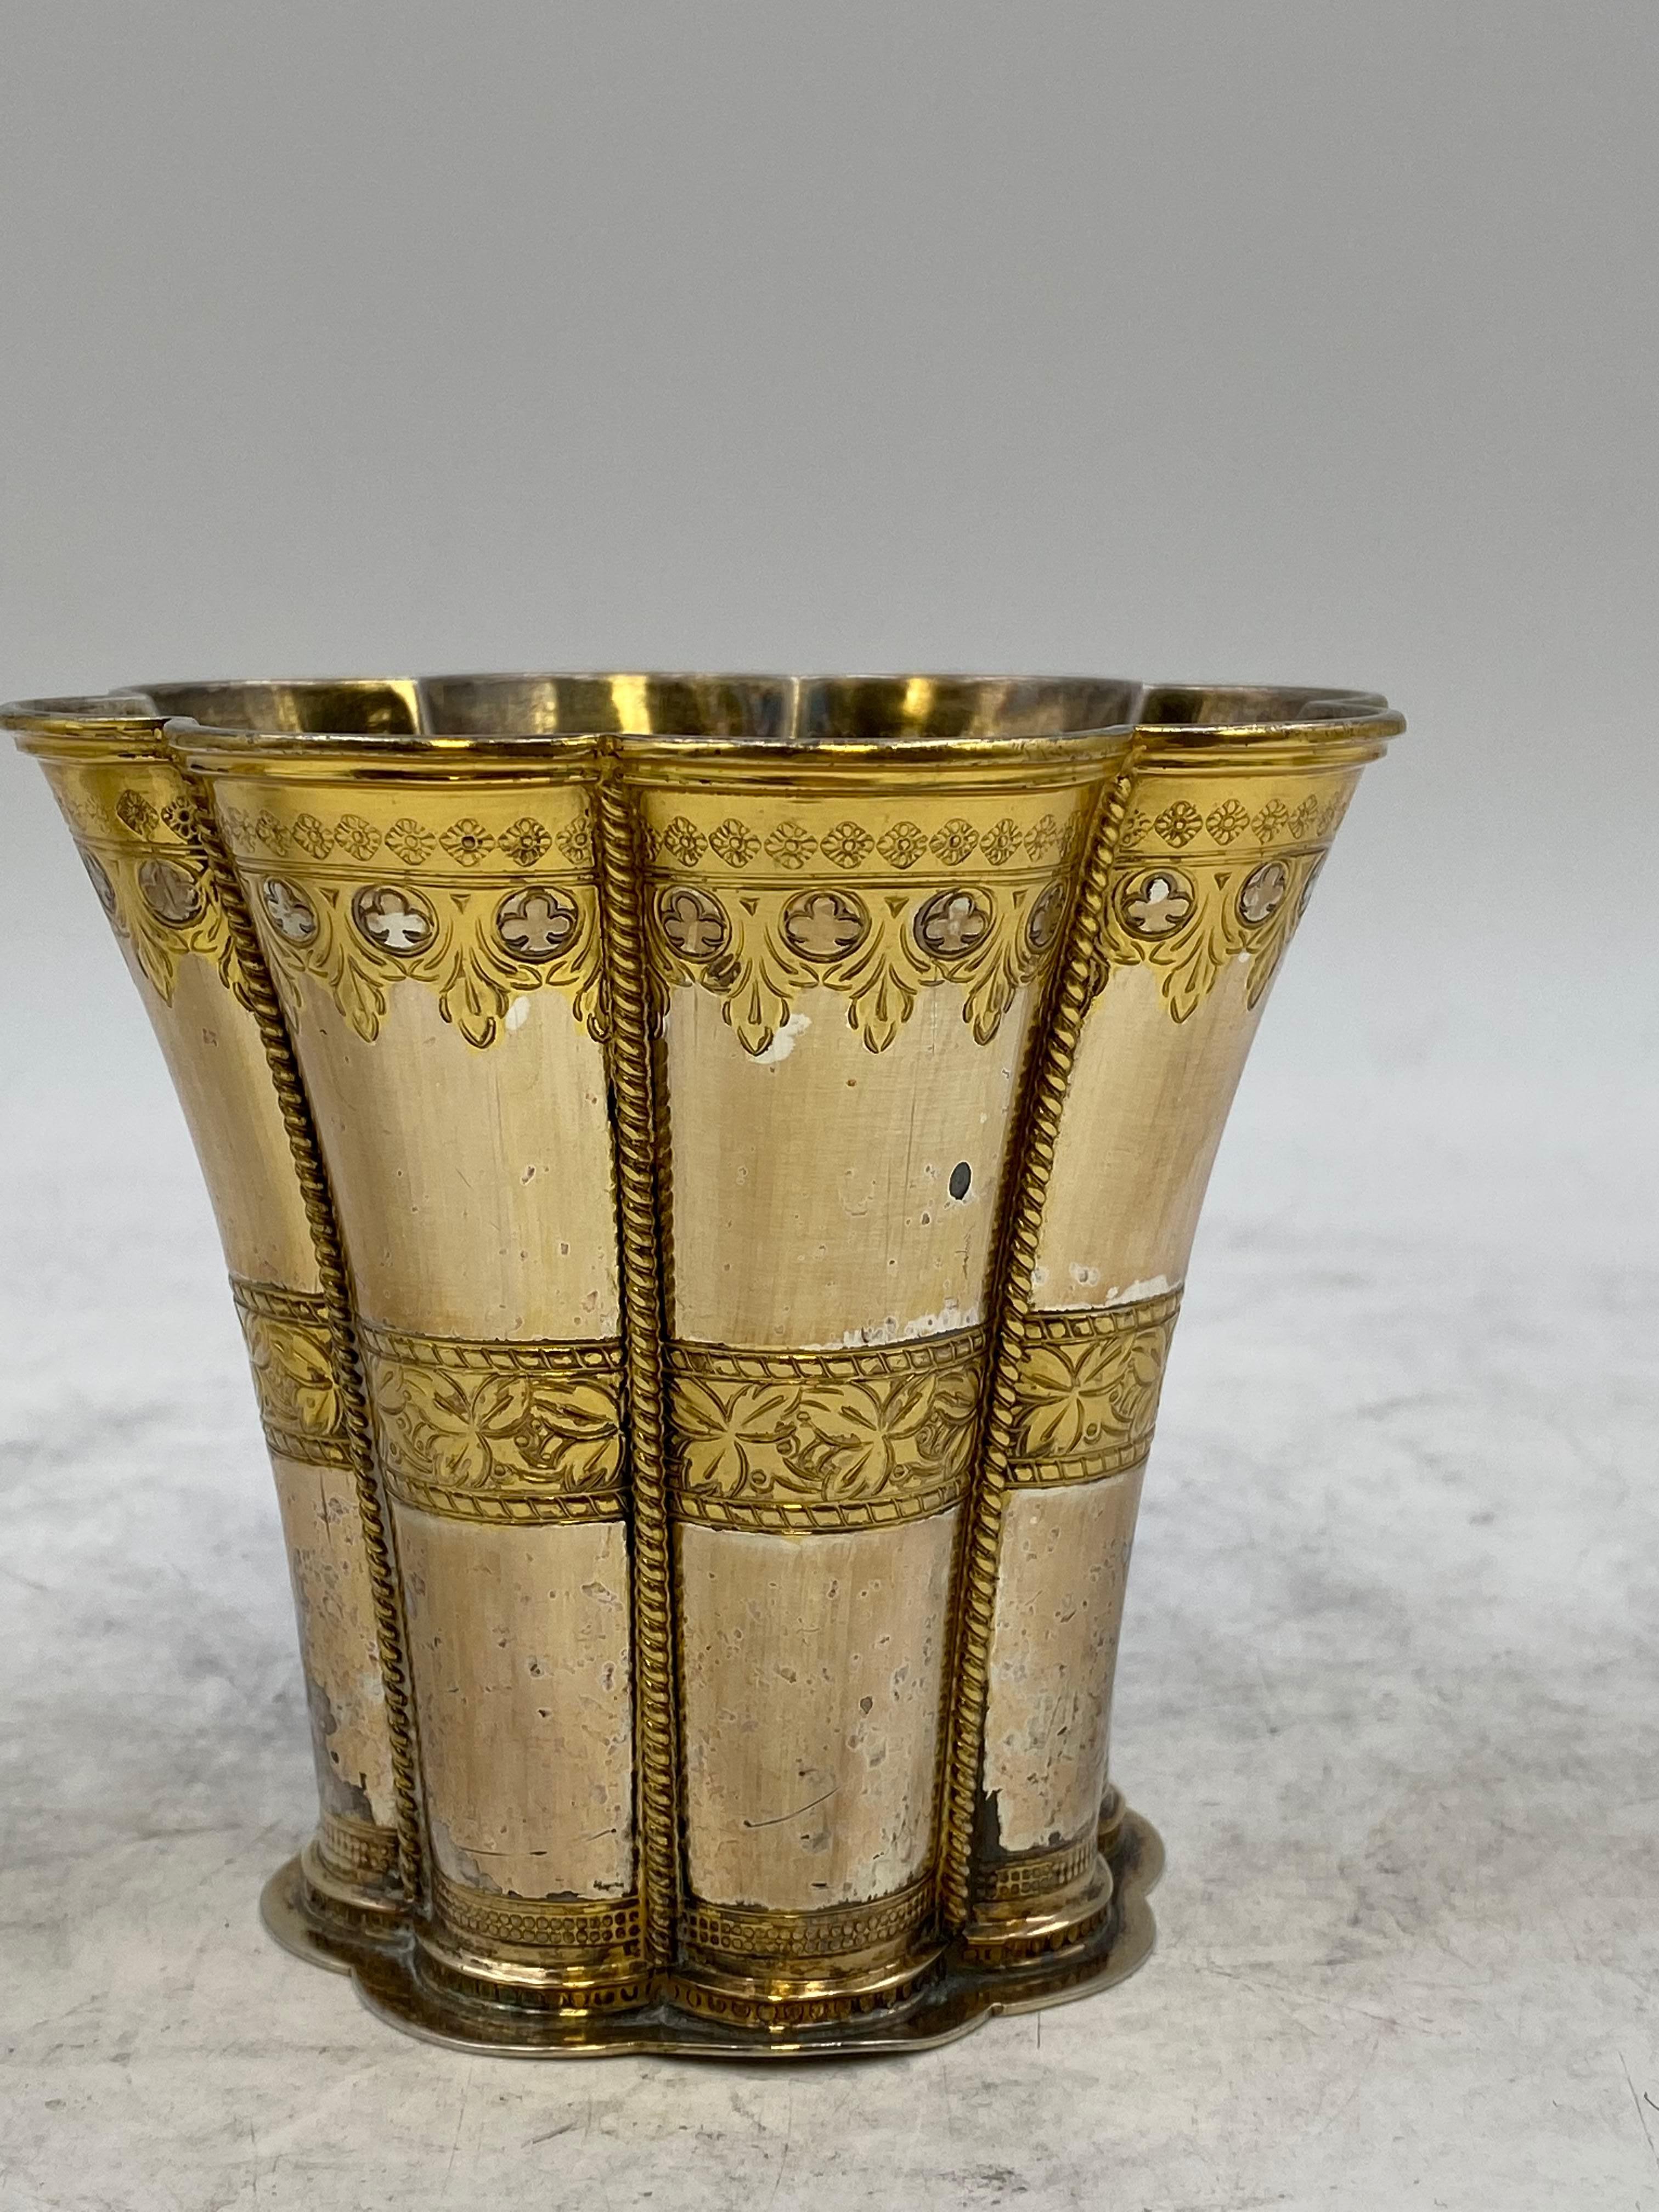 Set of 3 partially gilt sterling silver Kiddush cups/ goblets by A. Michelsen with engraved decorations across and gilt interiors. The tallest one measures 4'' in height by 4 1/4'' in diameter, the medium one is 3 1/2'' high by 3 3/4'' in diameter,